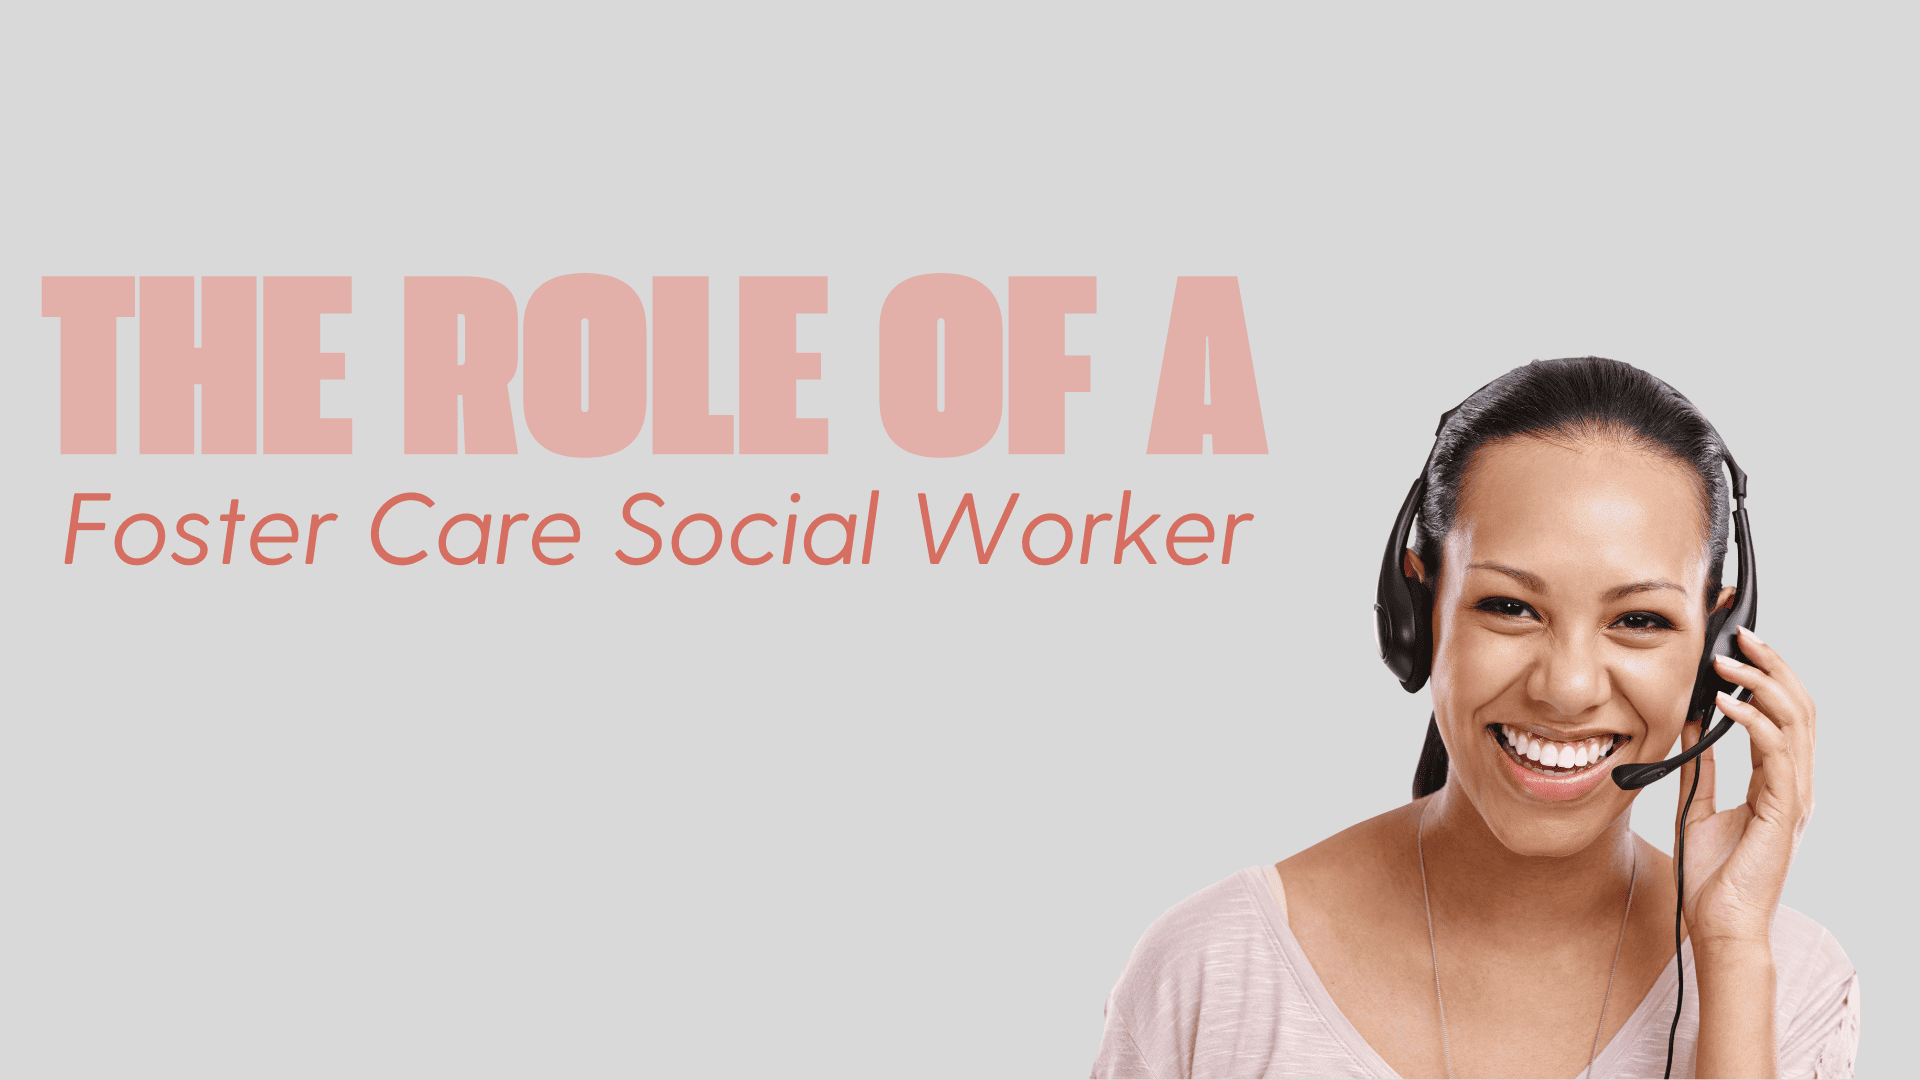 Image showing the role of a foster care social worker.